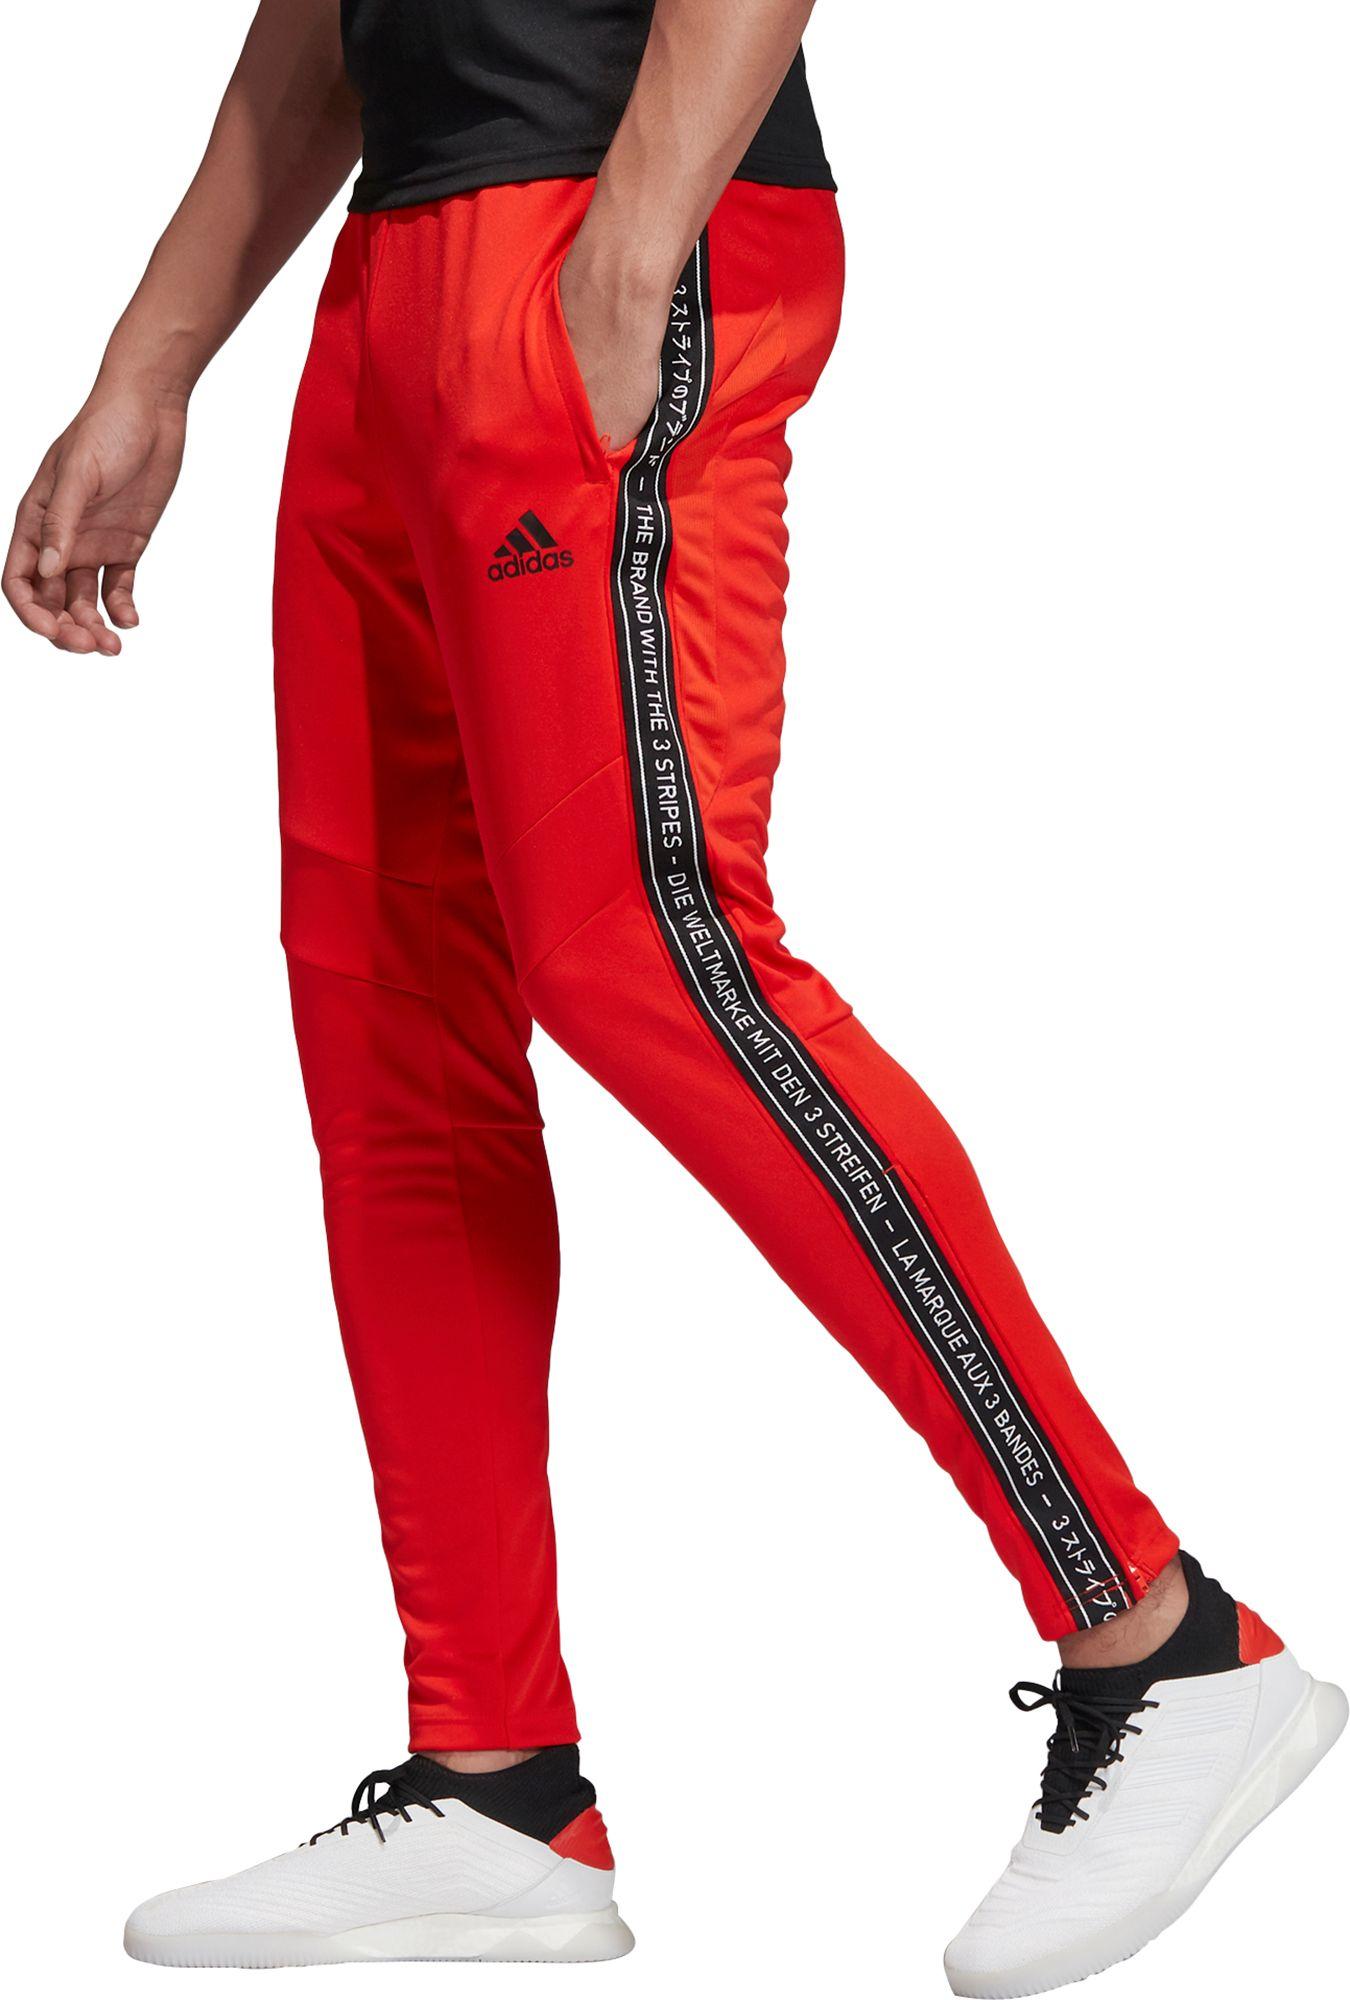 adidas Synthetic Tiro 19 Taped Training Pants in Red for Men - Lyst